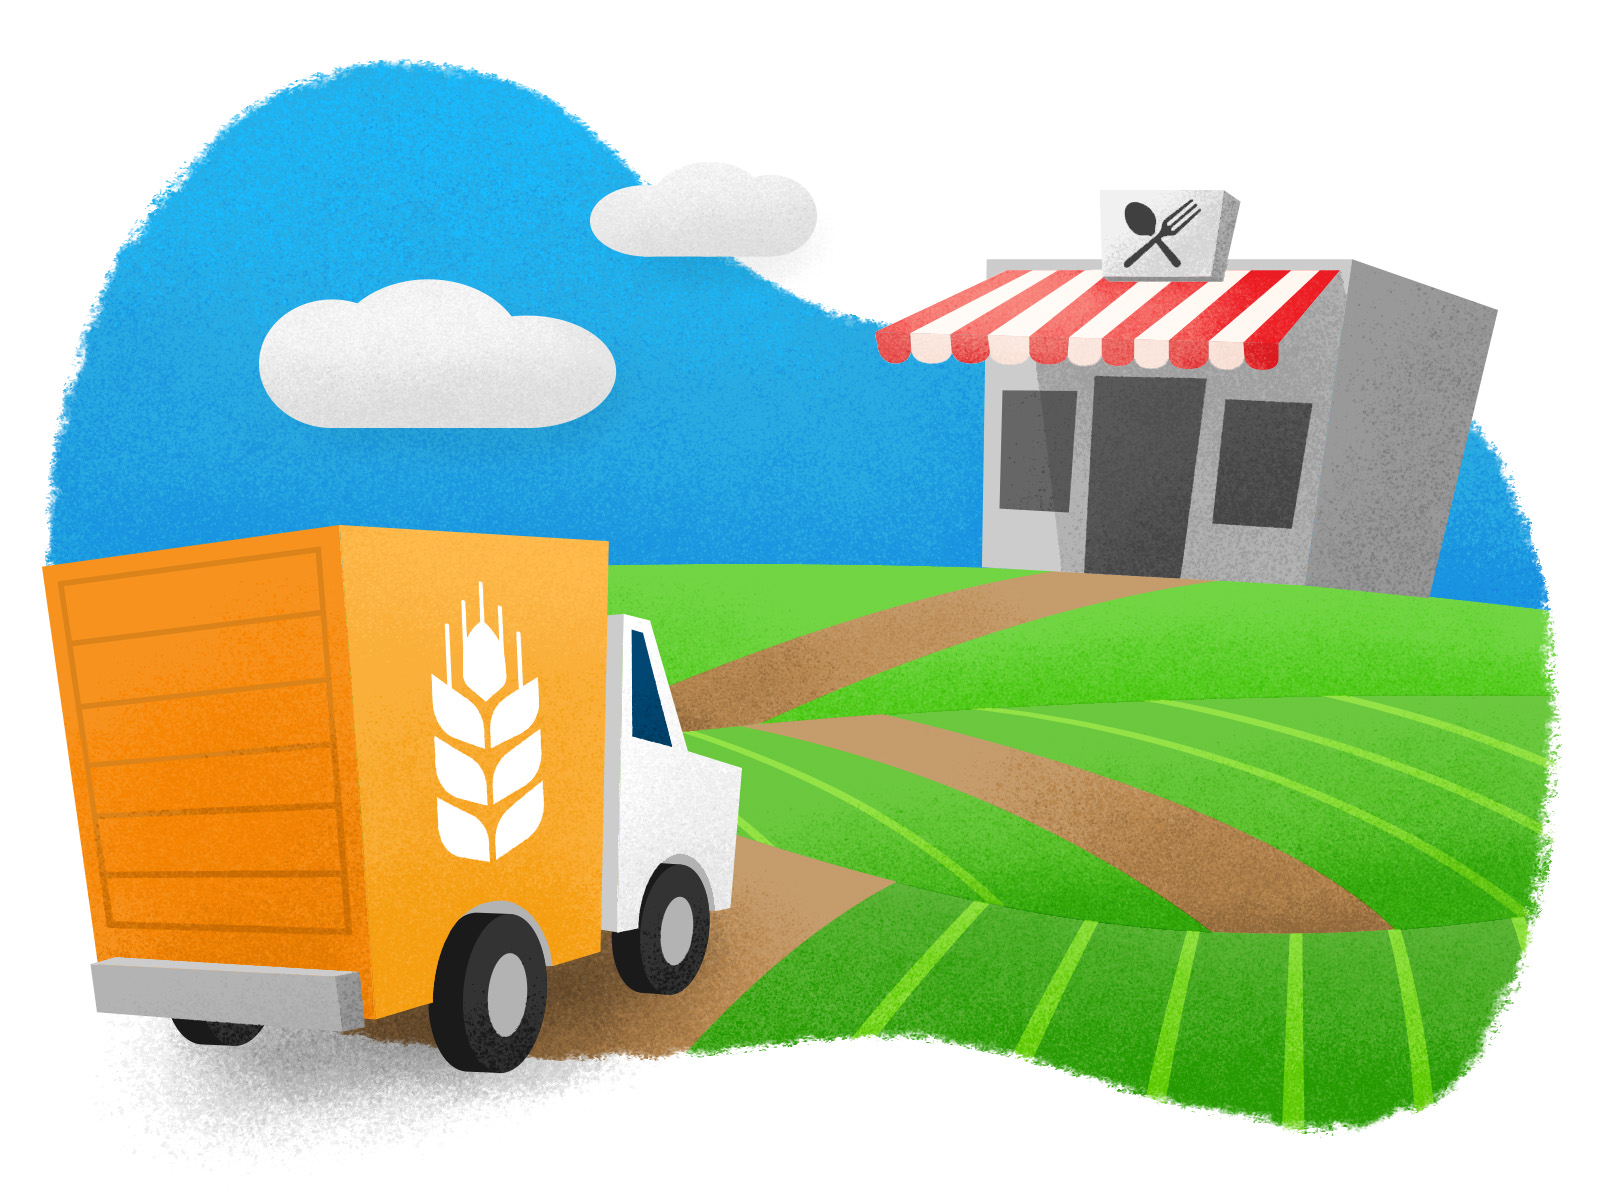 An illustration of a truck with a symbol of a wheat grain on the side driving on a road toward a restaurant building